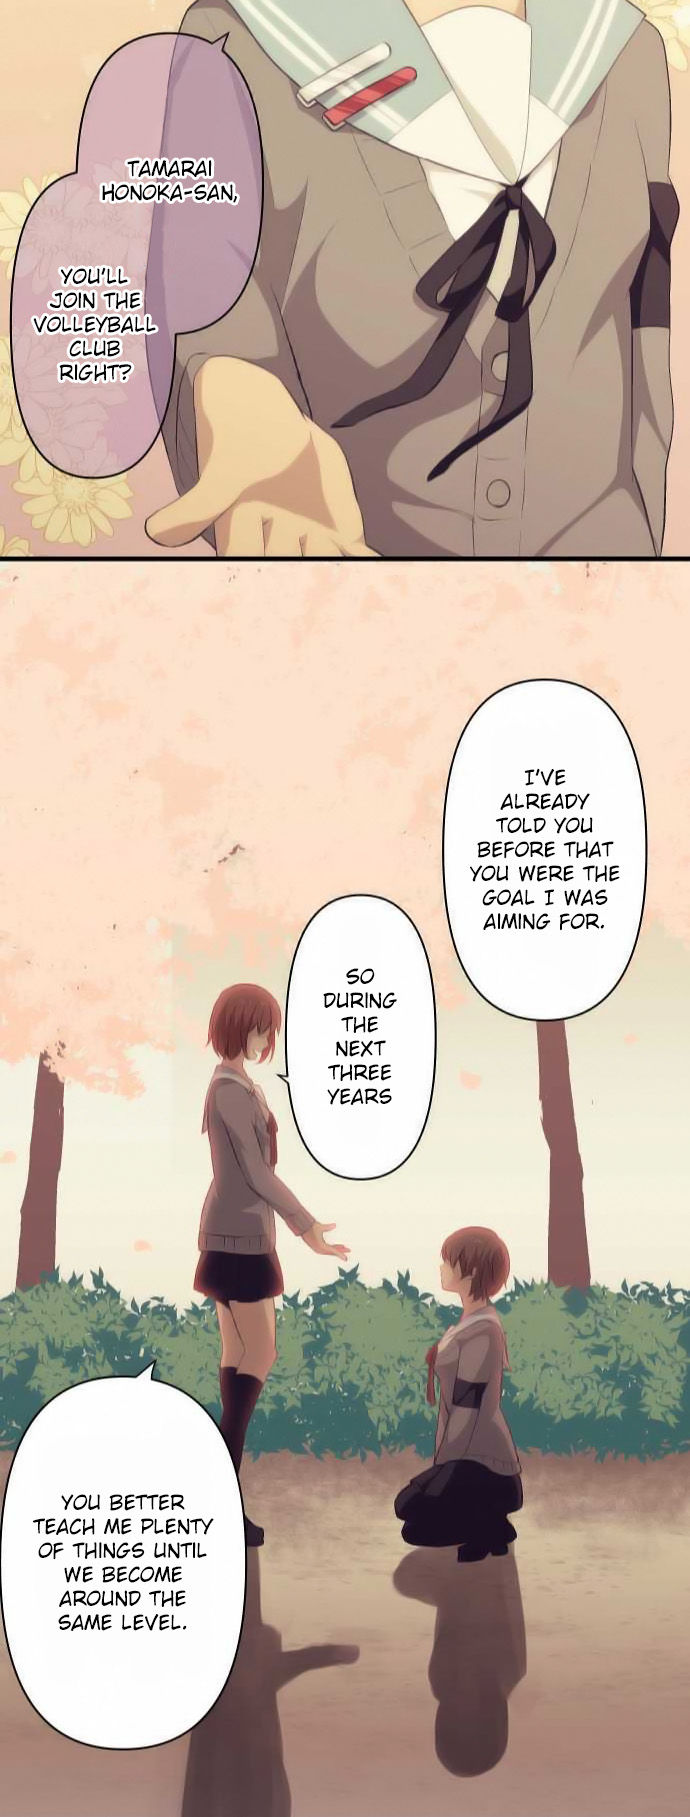 ReLIFE 75